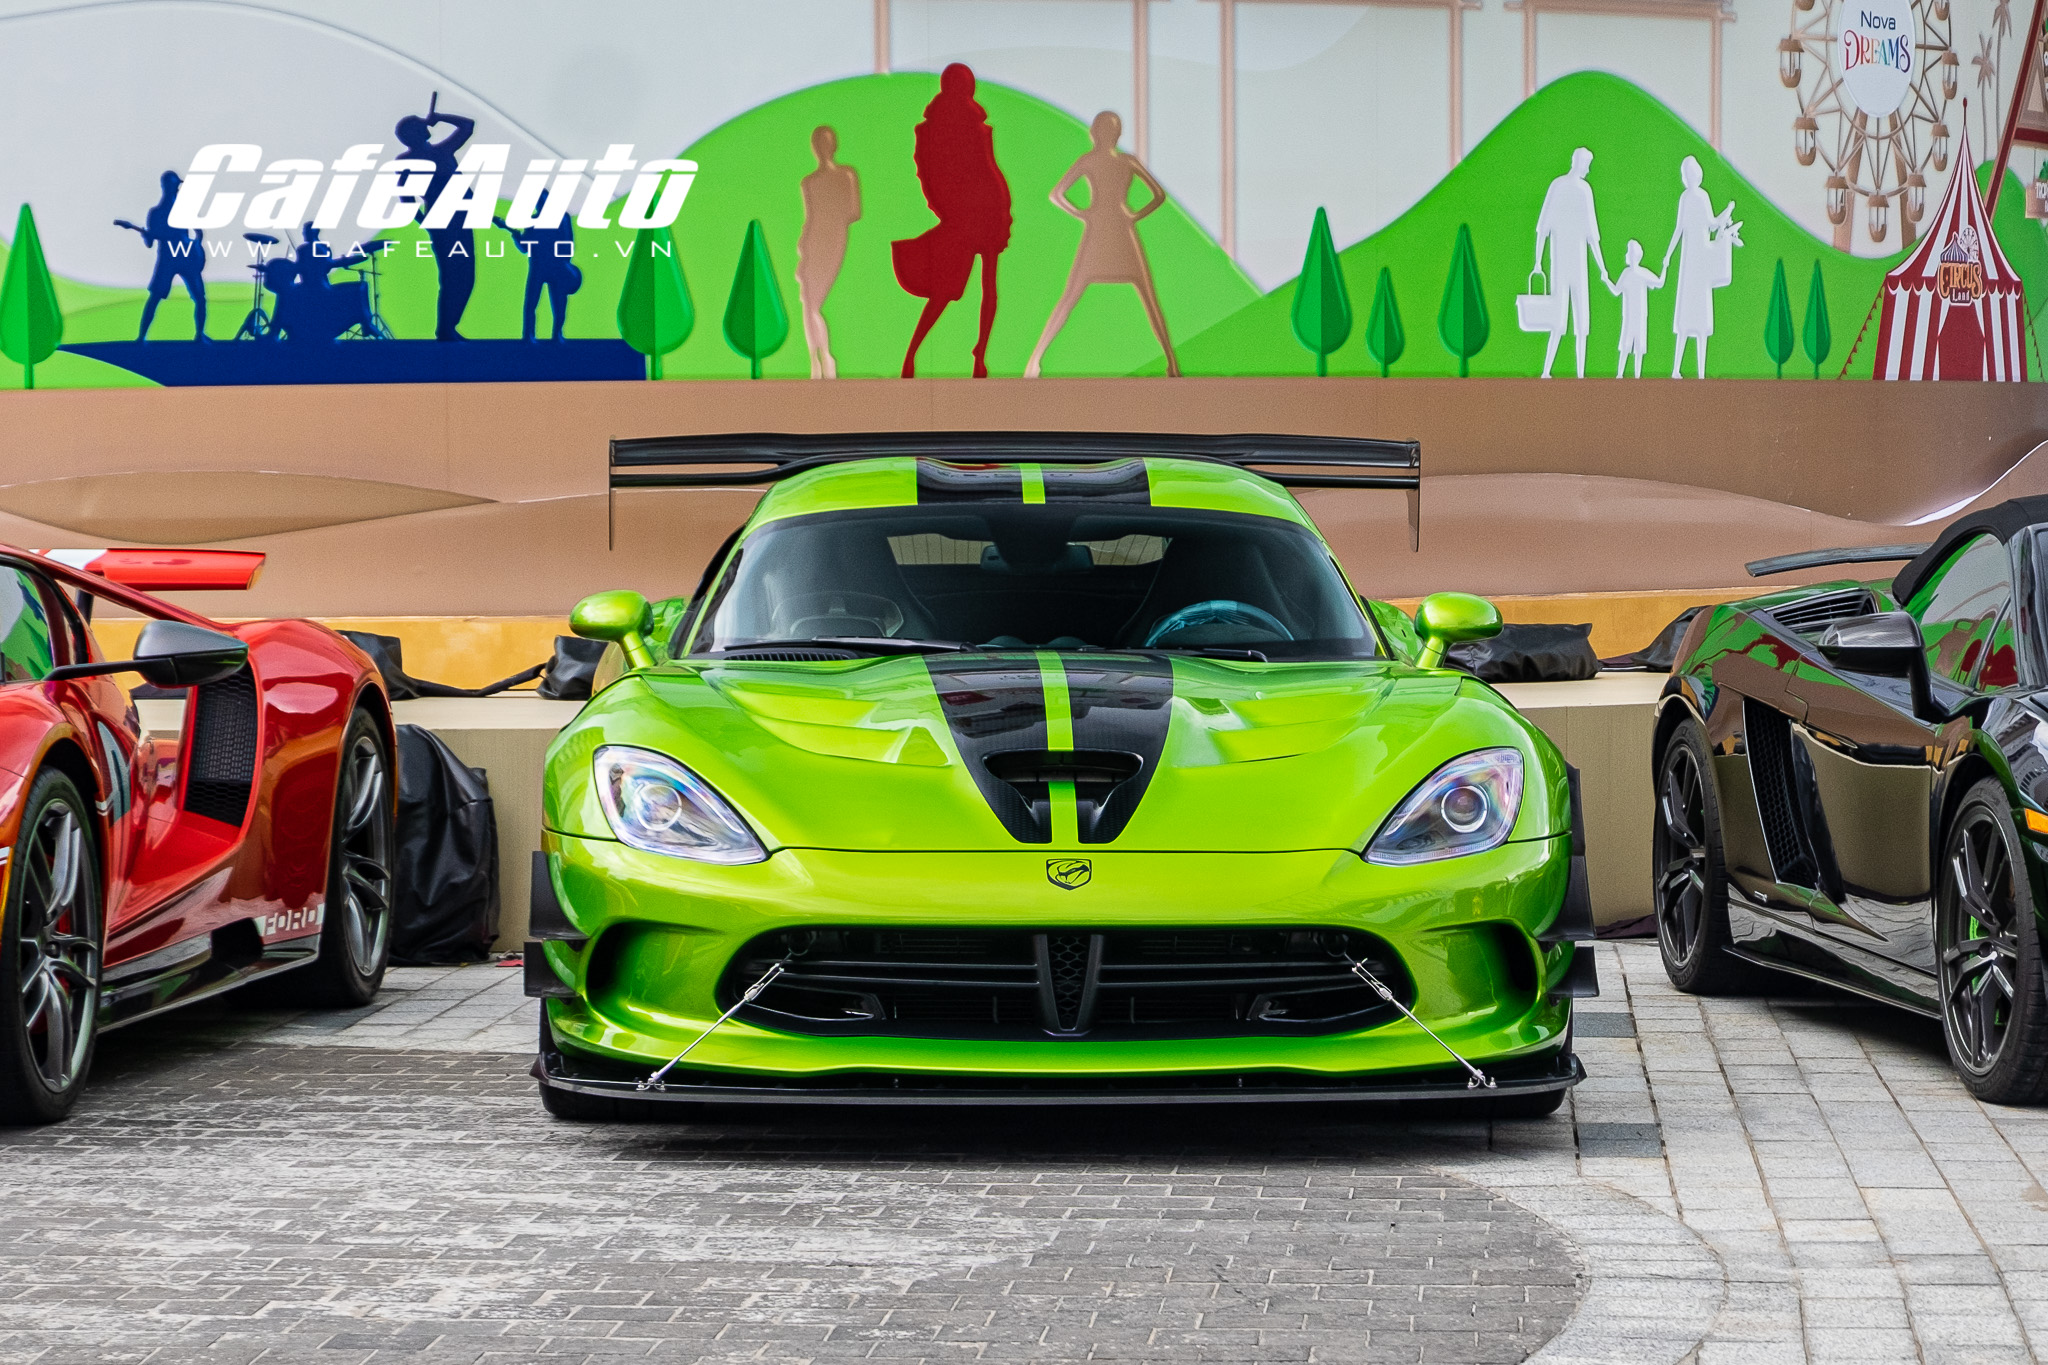 dodge-viper-acr-the-he-moi-doc-nhat-cafeautovn-1